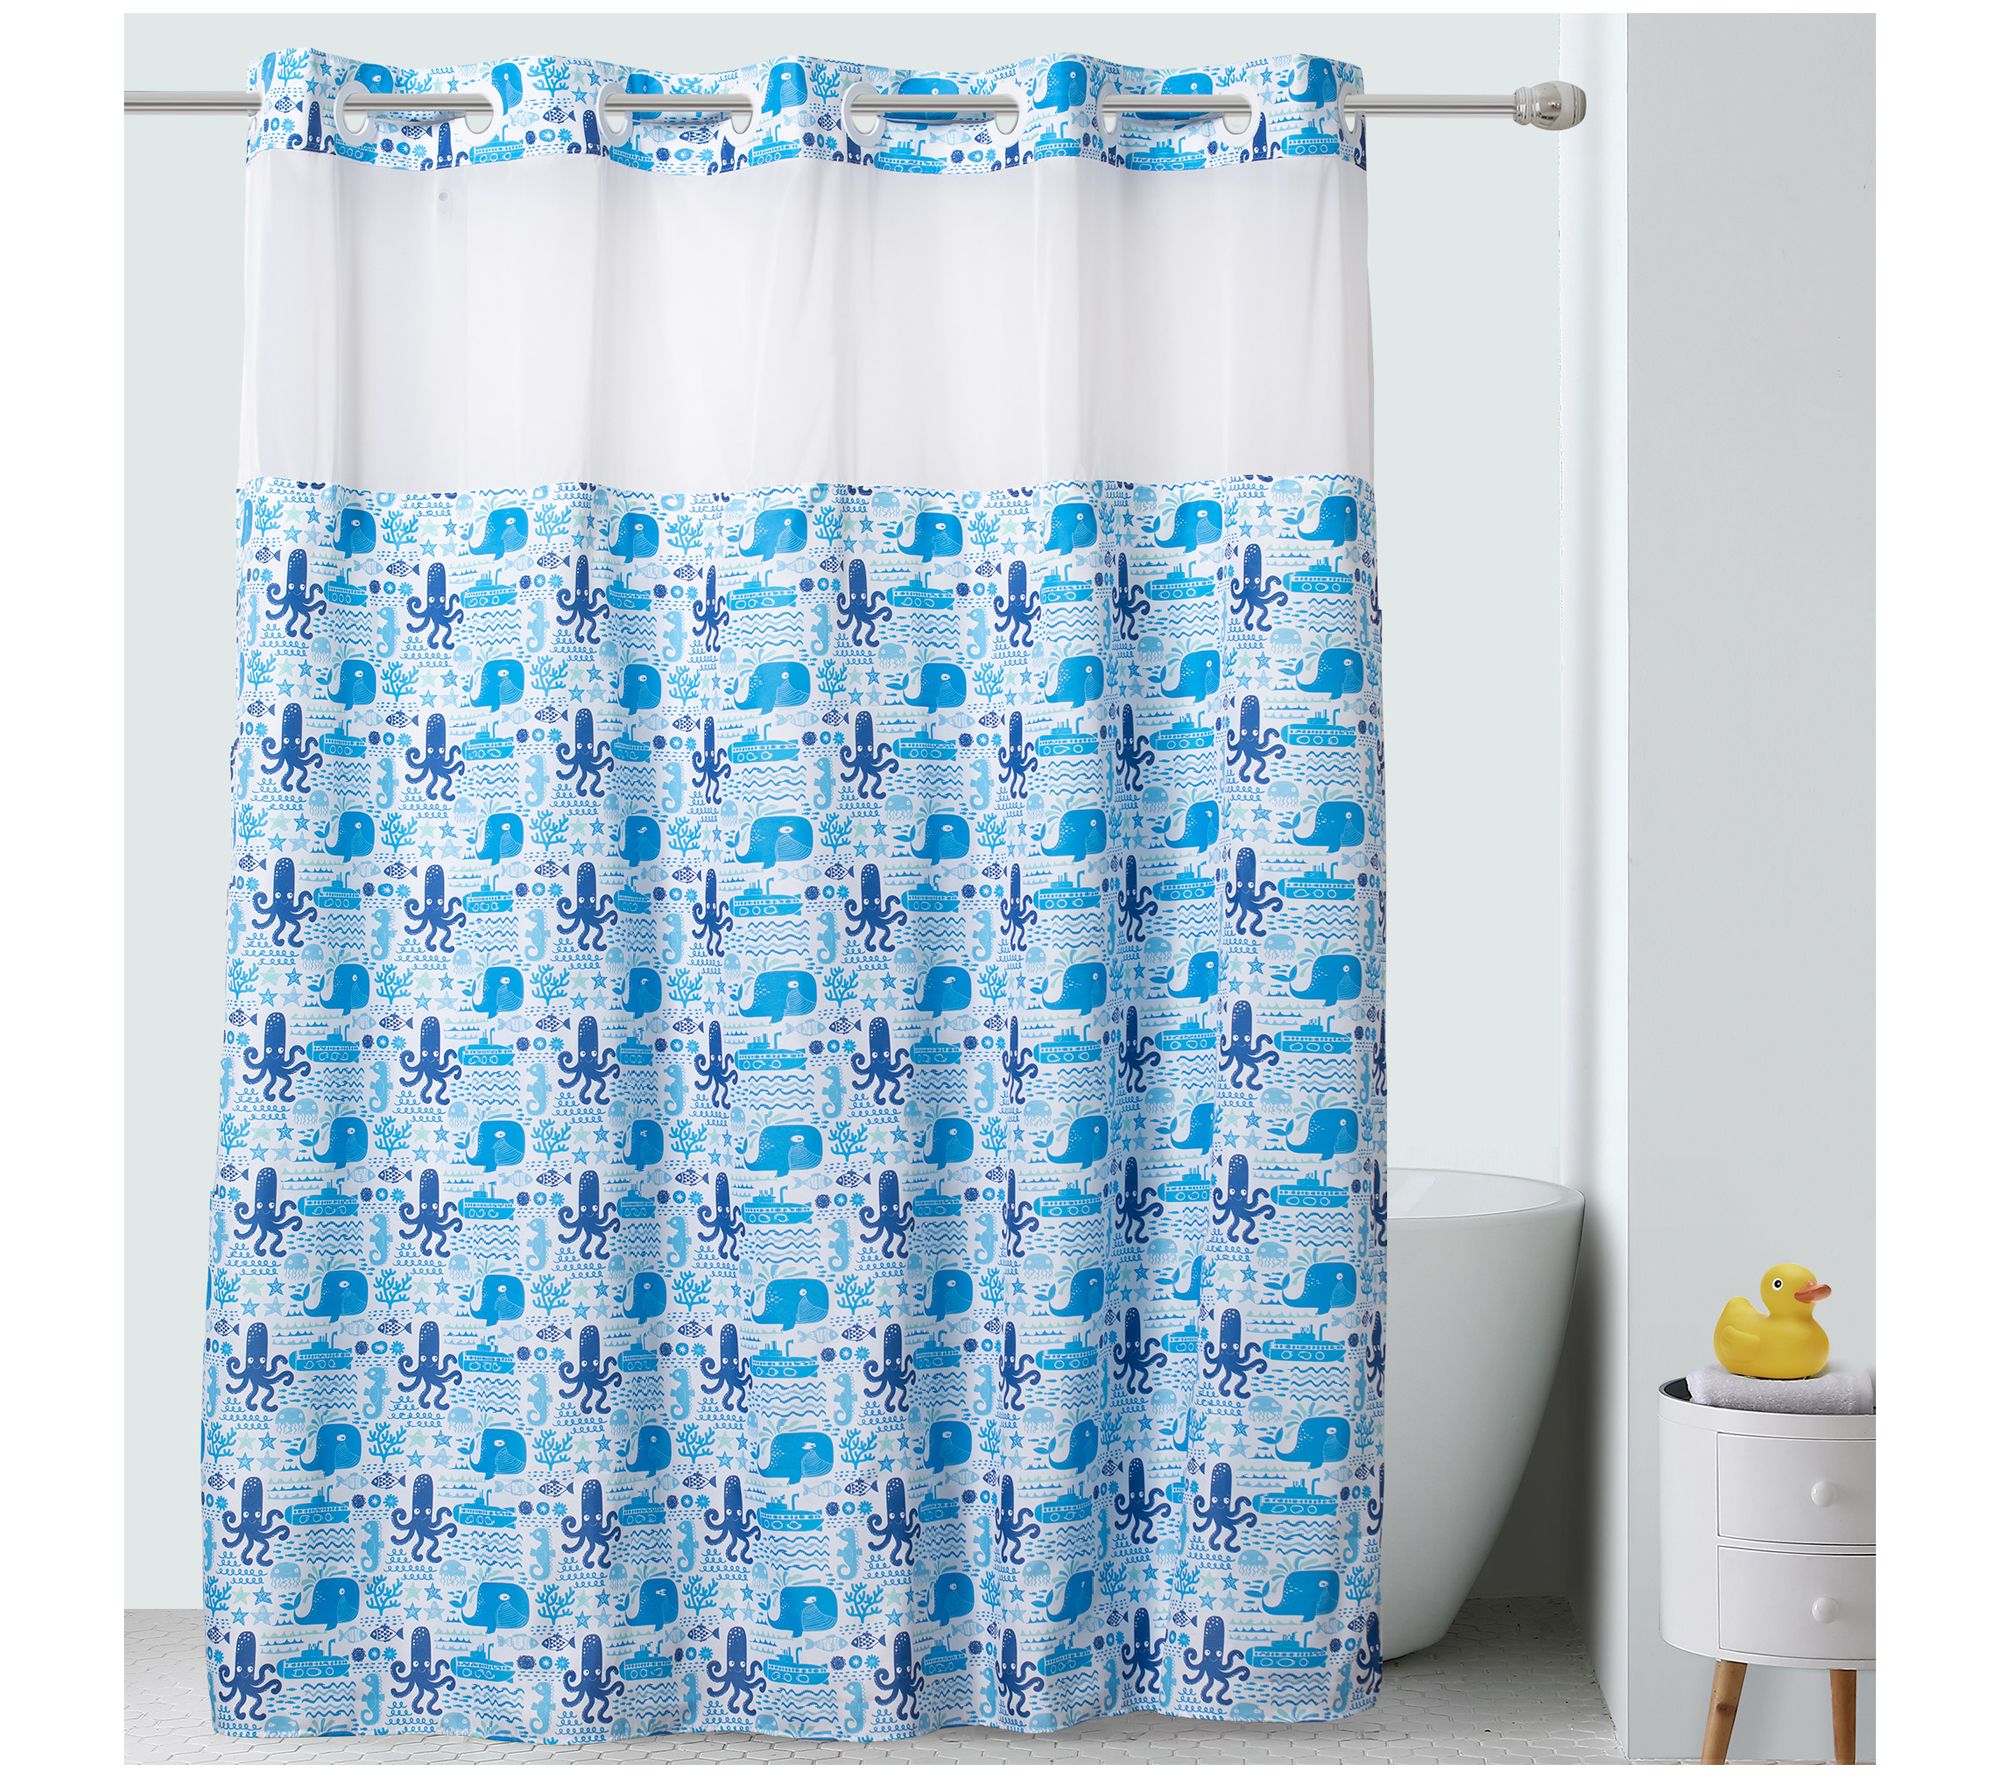 Hookless Shower Curtain For Kids Silly, Frontgate Shower Curtain